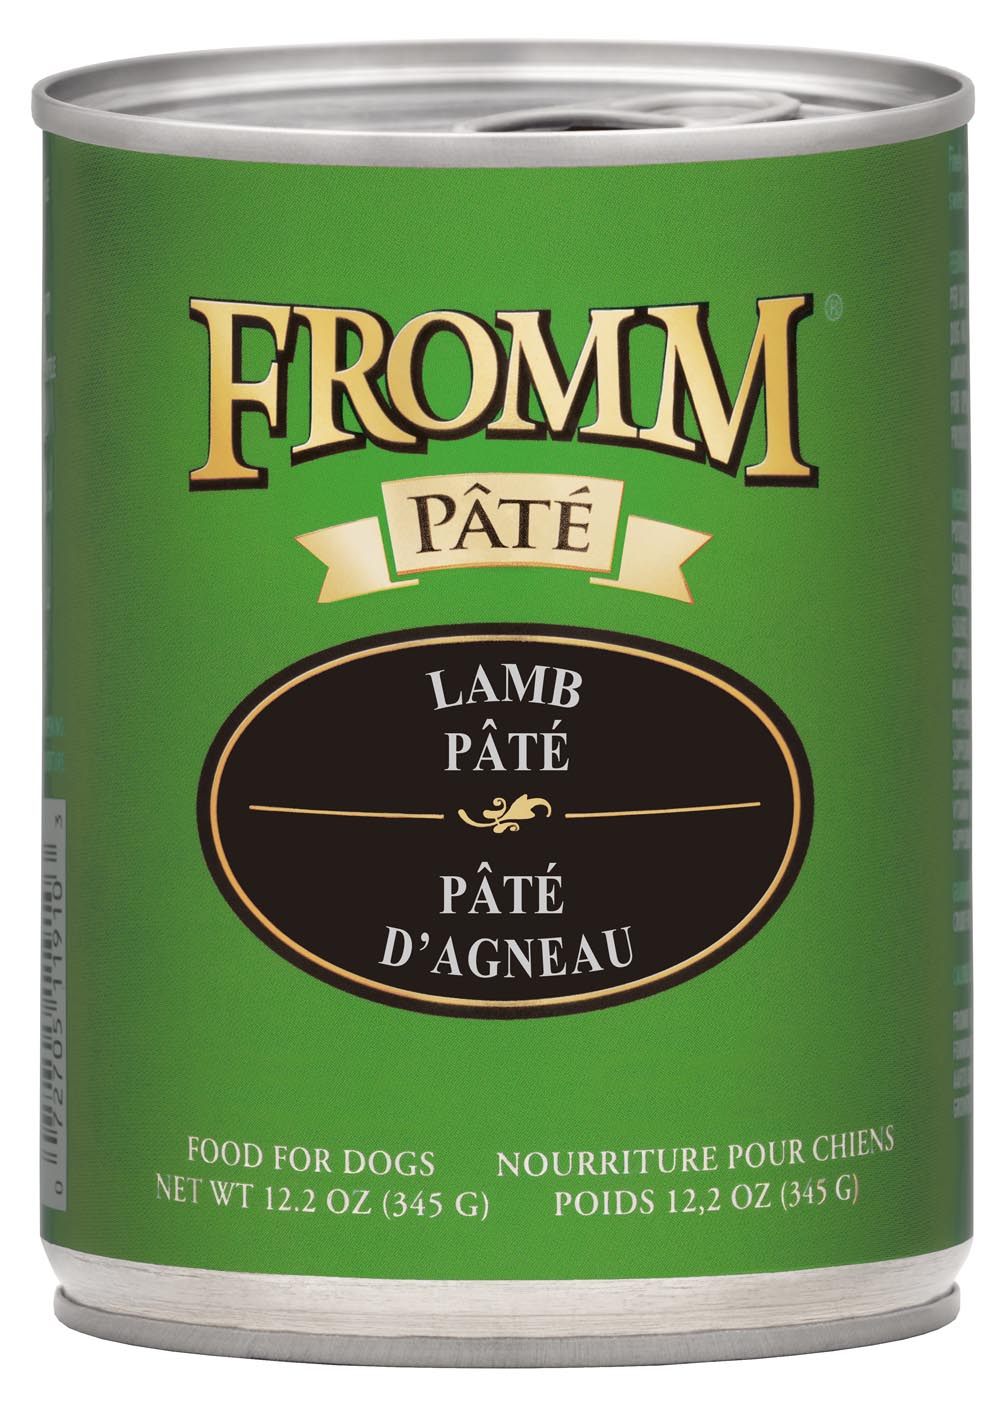 Fromm Lamb Pate